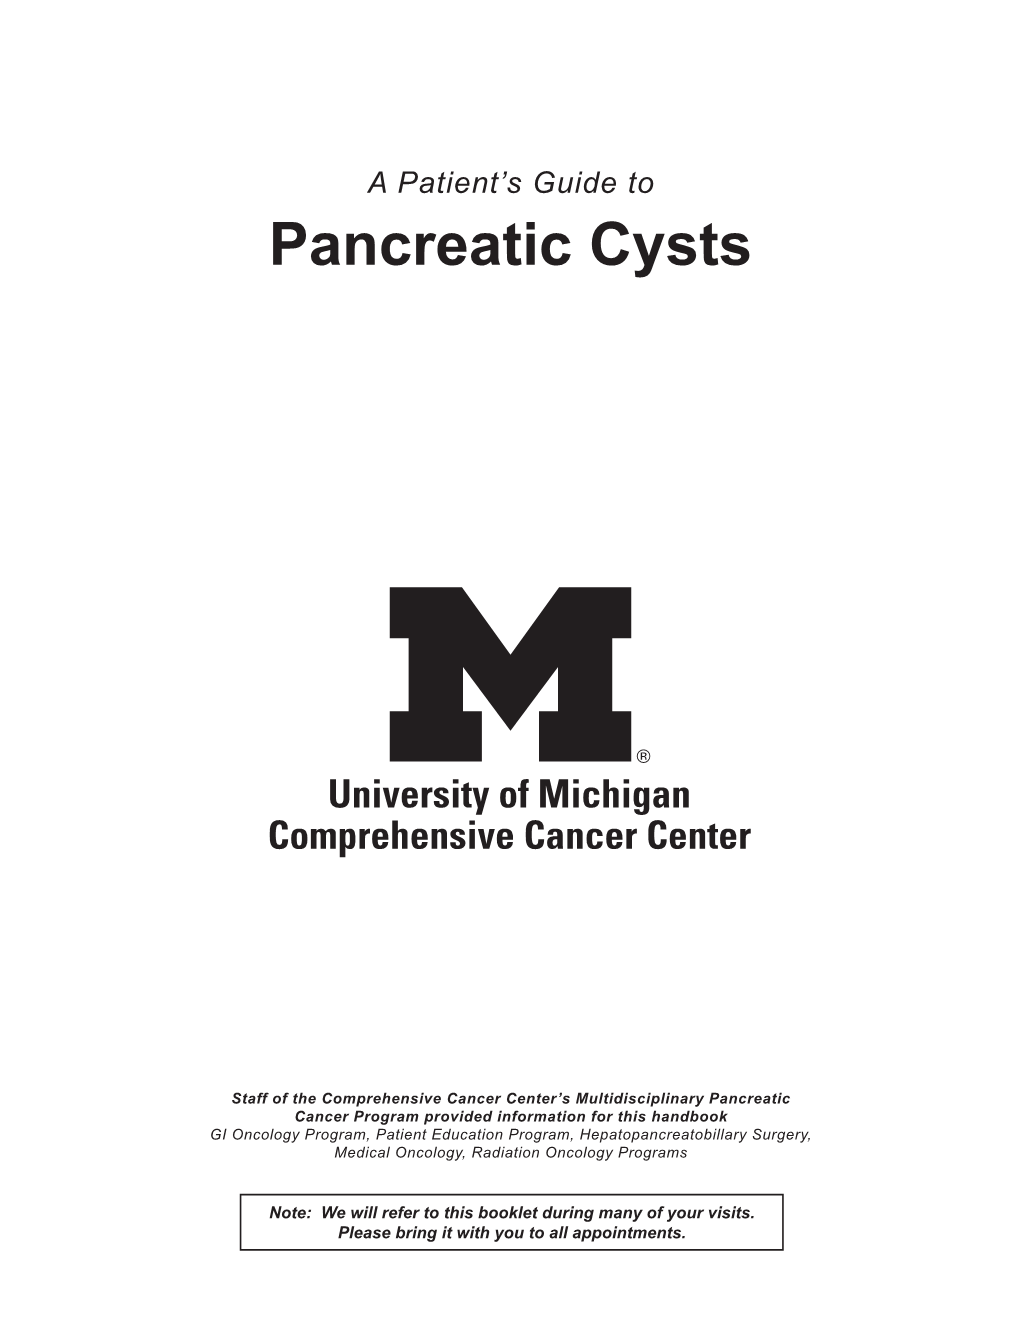 A Patient's Guide to Pancreatic Cysts